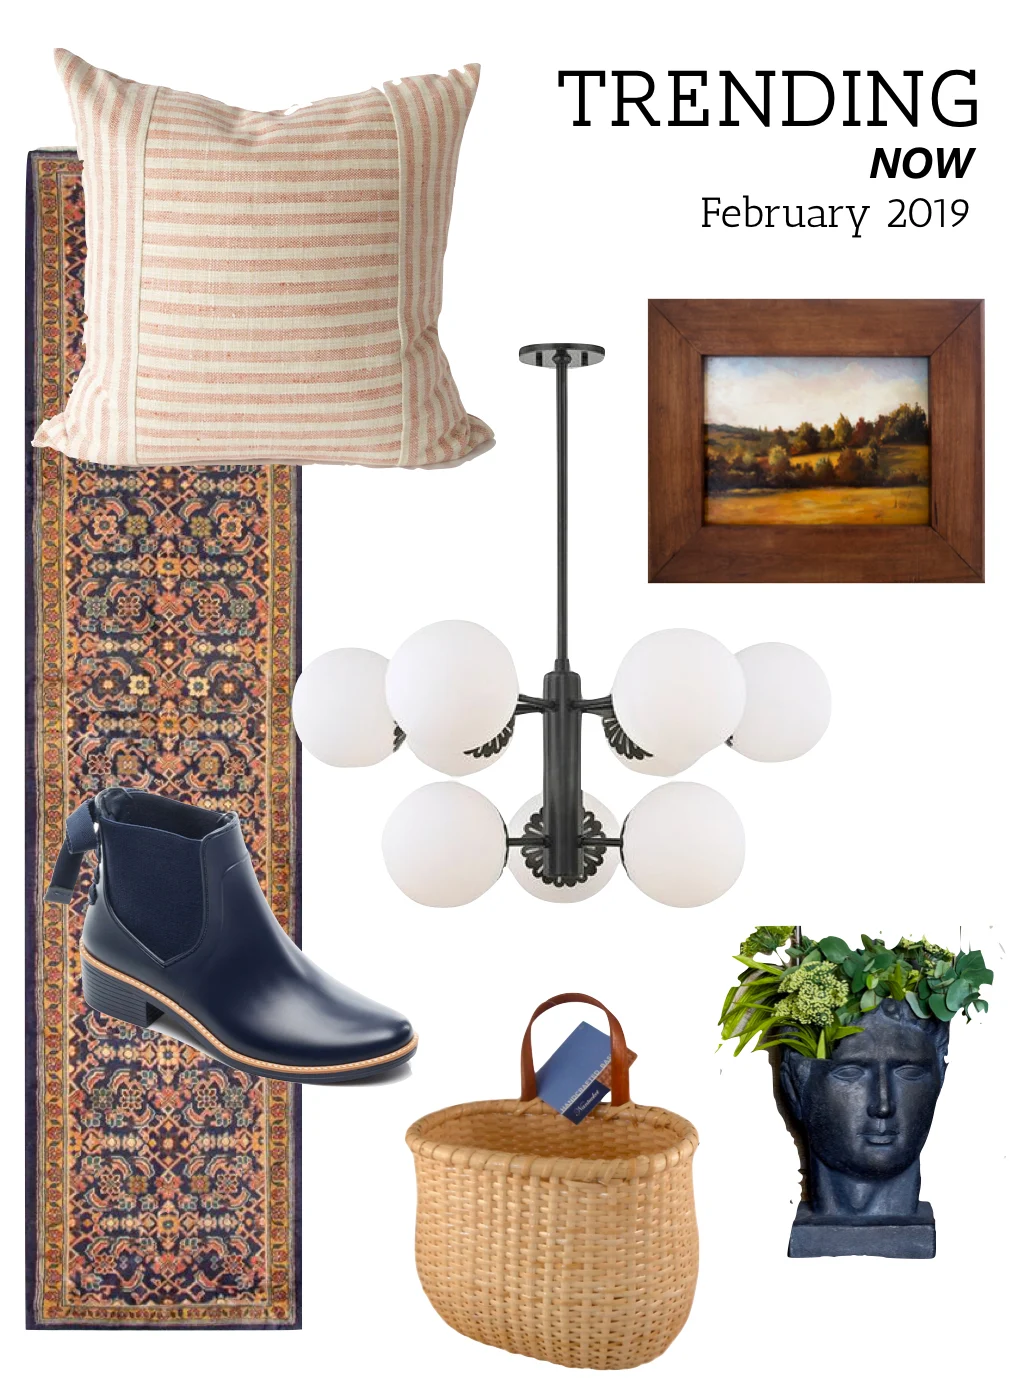 Home design trends for spring 2019. Vintage rugs, coral pillows, landscape paintings, globe chandeliers, wall baskets